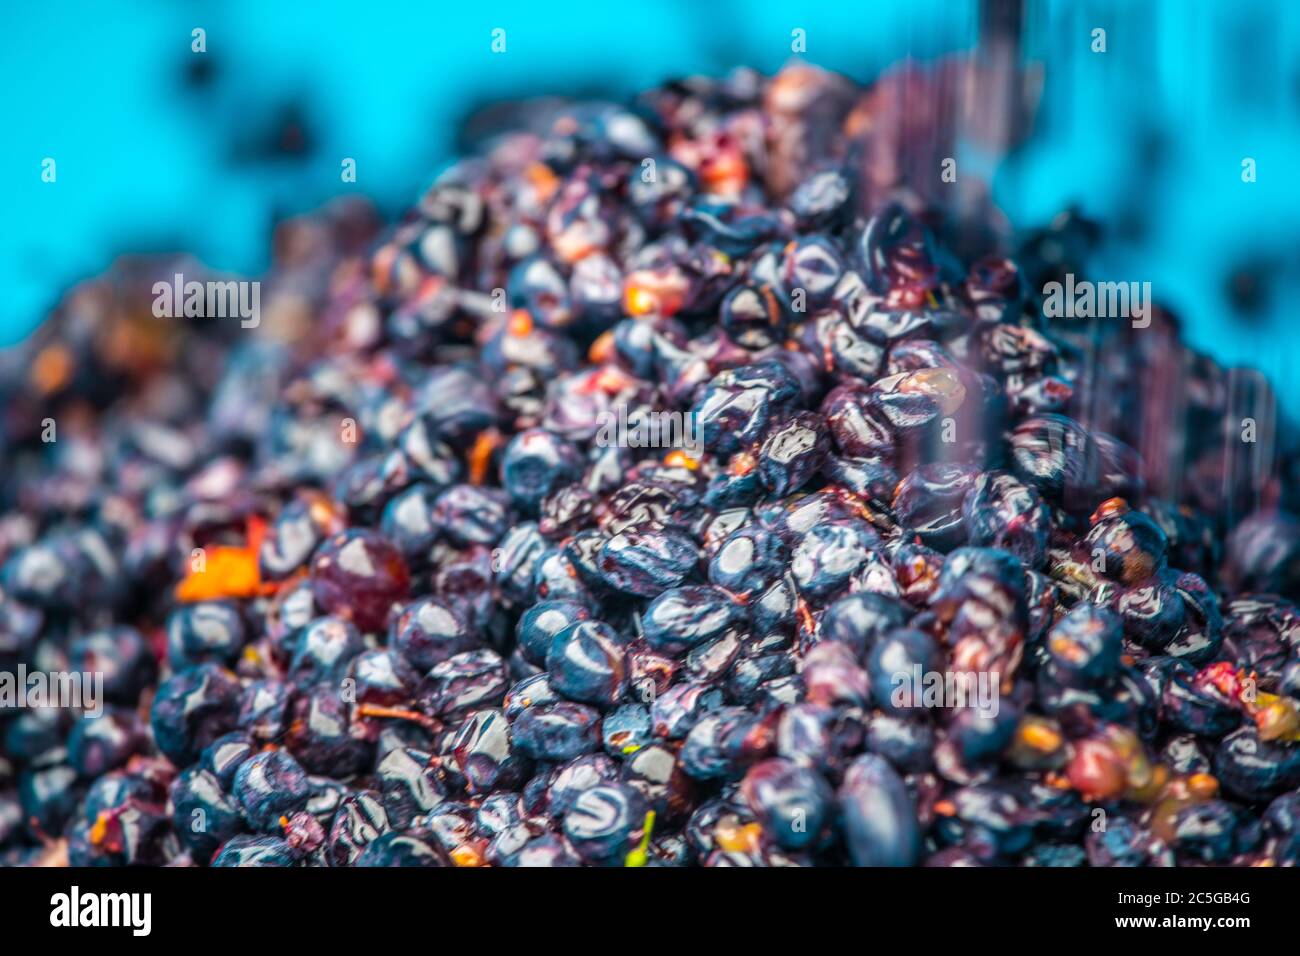 Grapes Being Processed at the Black Pearl Winery, Paarl, Western Cape, South Africa Stock Photo